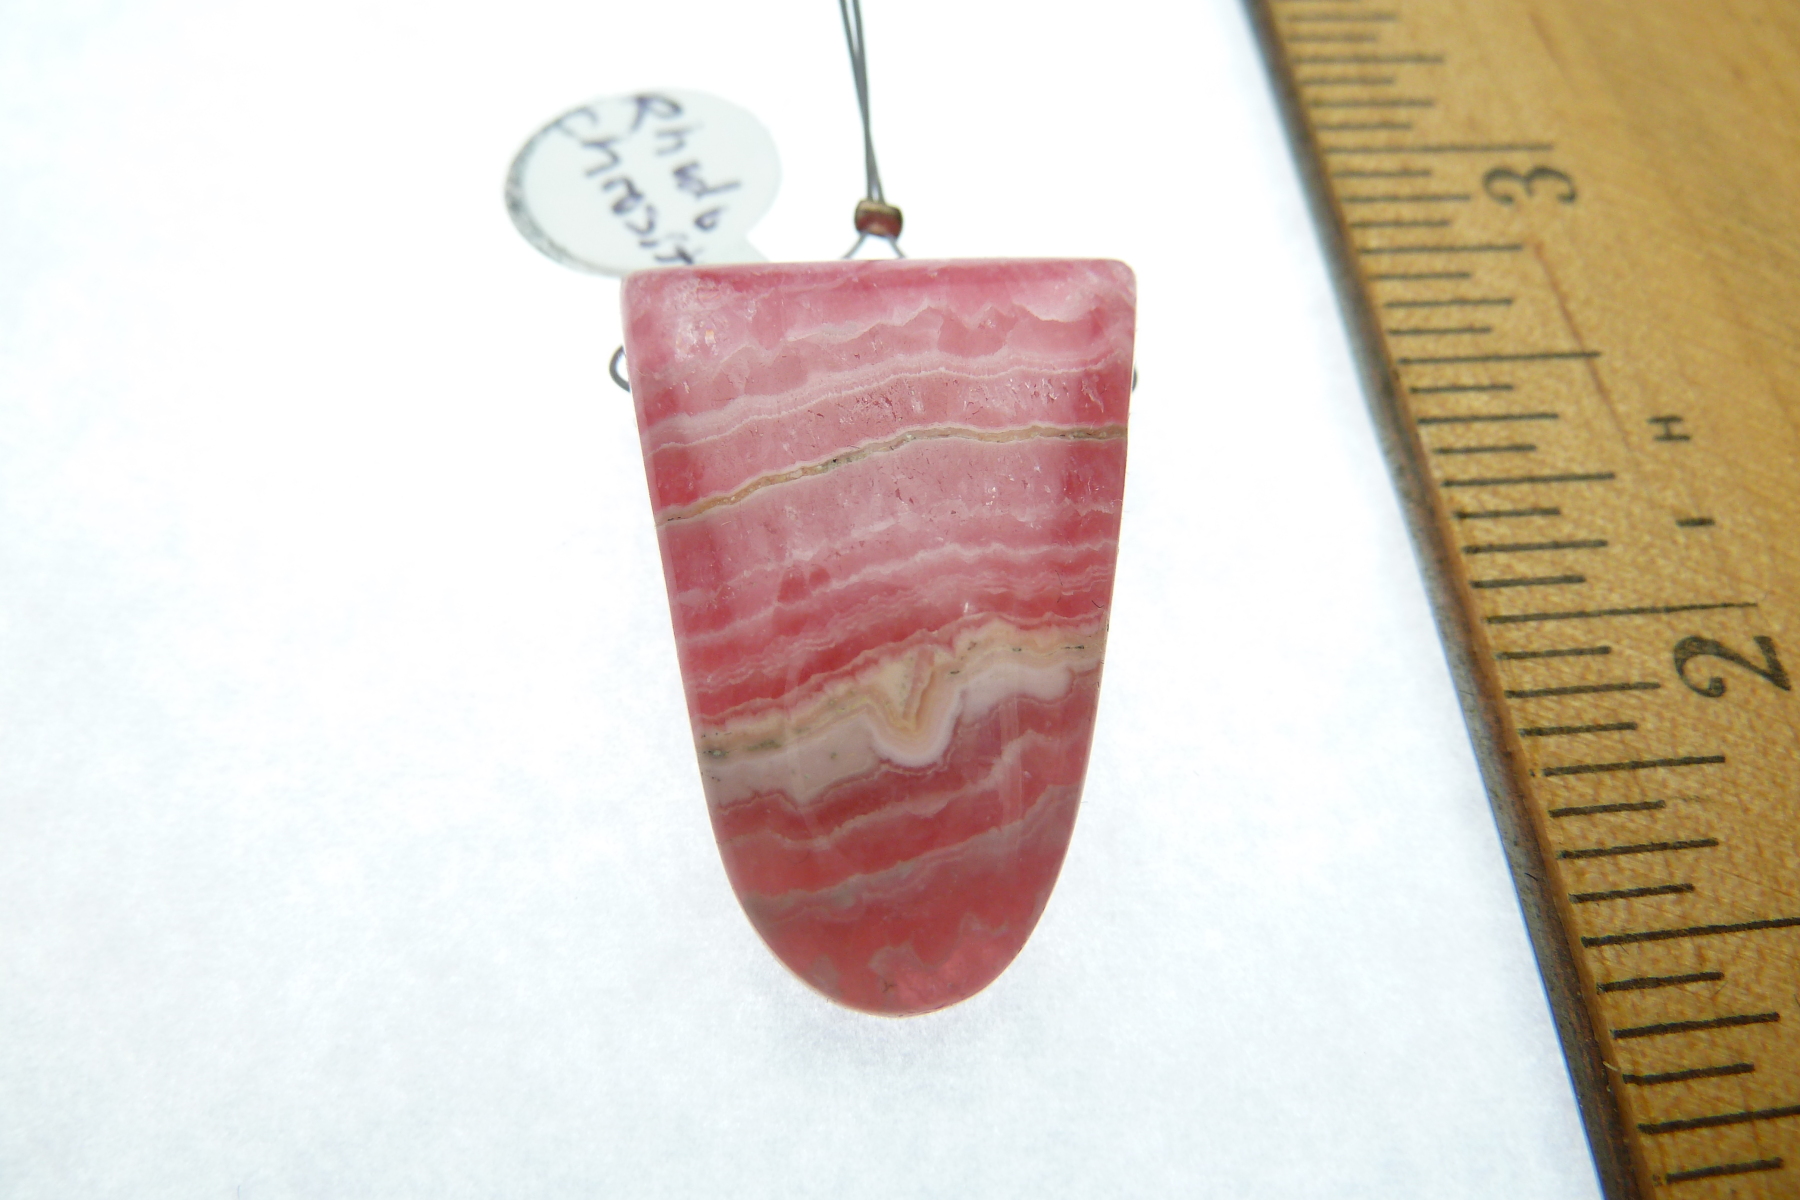 Scaled image P1010994.JPG: Item #Rhodo1, Price $50.00 Rhodochrosite pendant drop bead. Simple bead cut drilled at the widest part of the bead. Bead is 29mm long by 20mm wide. Bead is drilled at the widest part of the stone and drill hole size is about 2.0 mm.� 